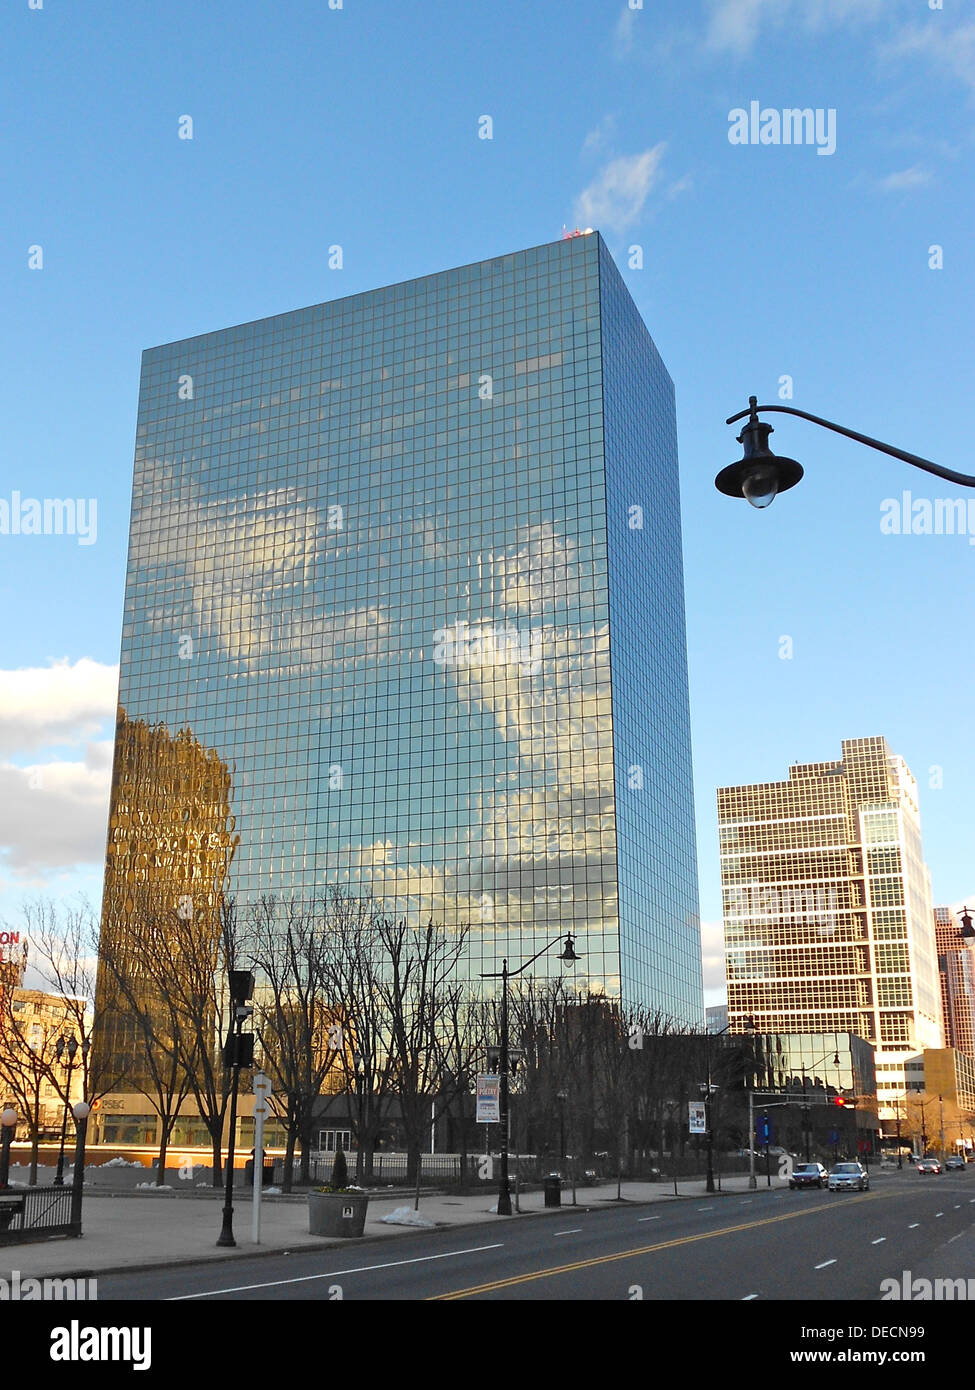 PSE&G (Public Service Enterprise Group) headquarters building at 80 Park Place (just off Broad Street), in Newark, New Jersey. Stock Photo